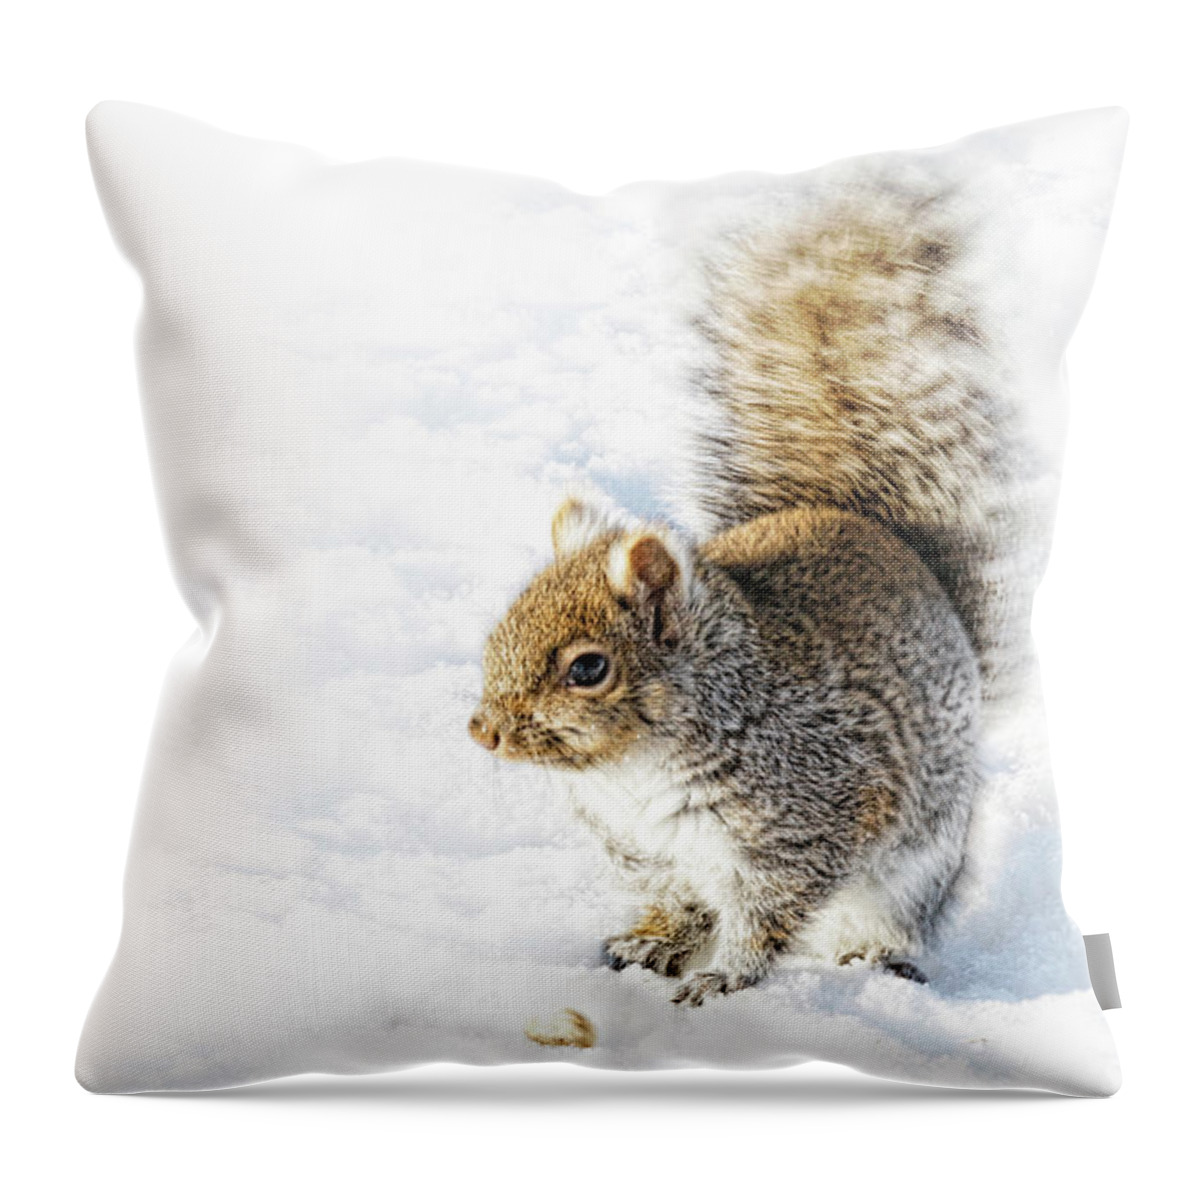 Squirrel Throw Pillow featuring the photograph High Key Squirrel by Tatiana Travelways